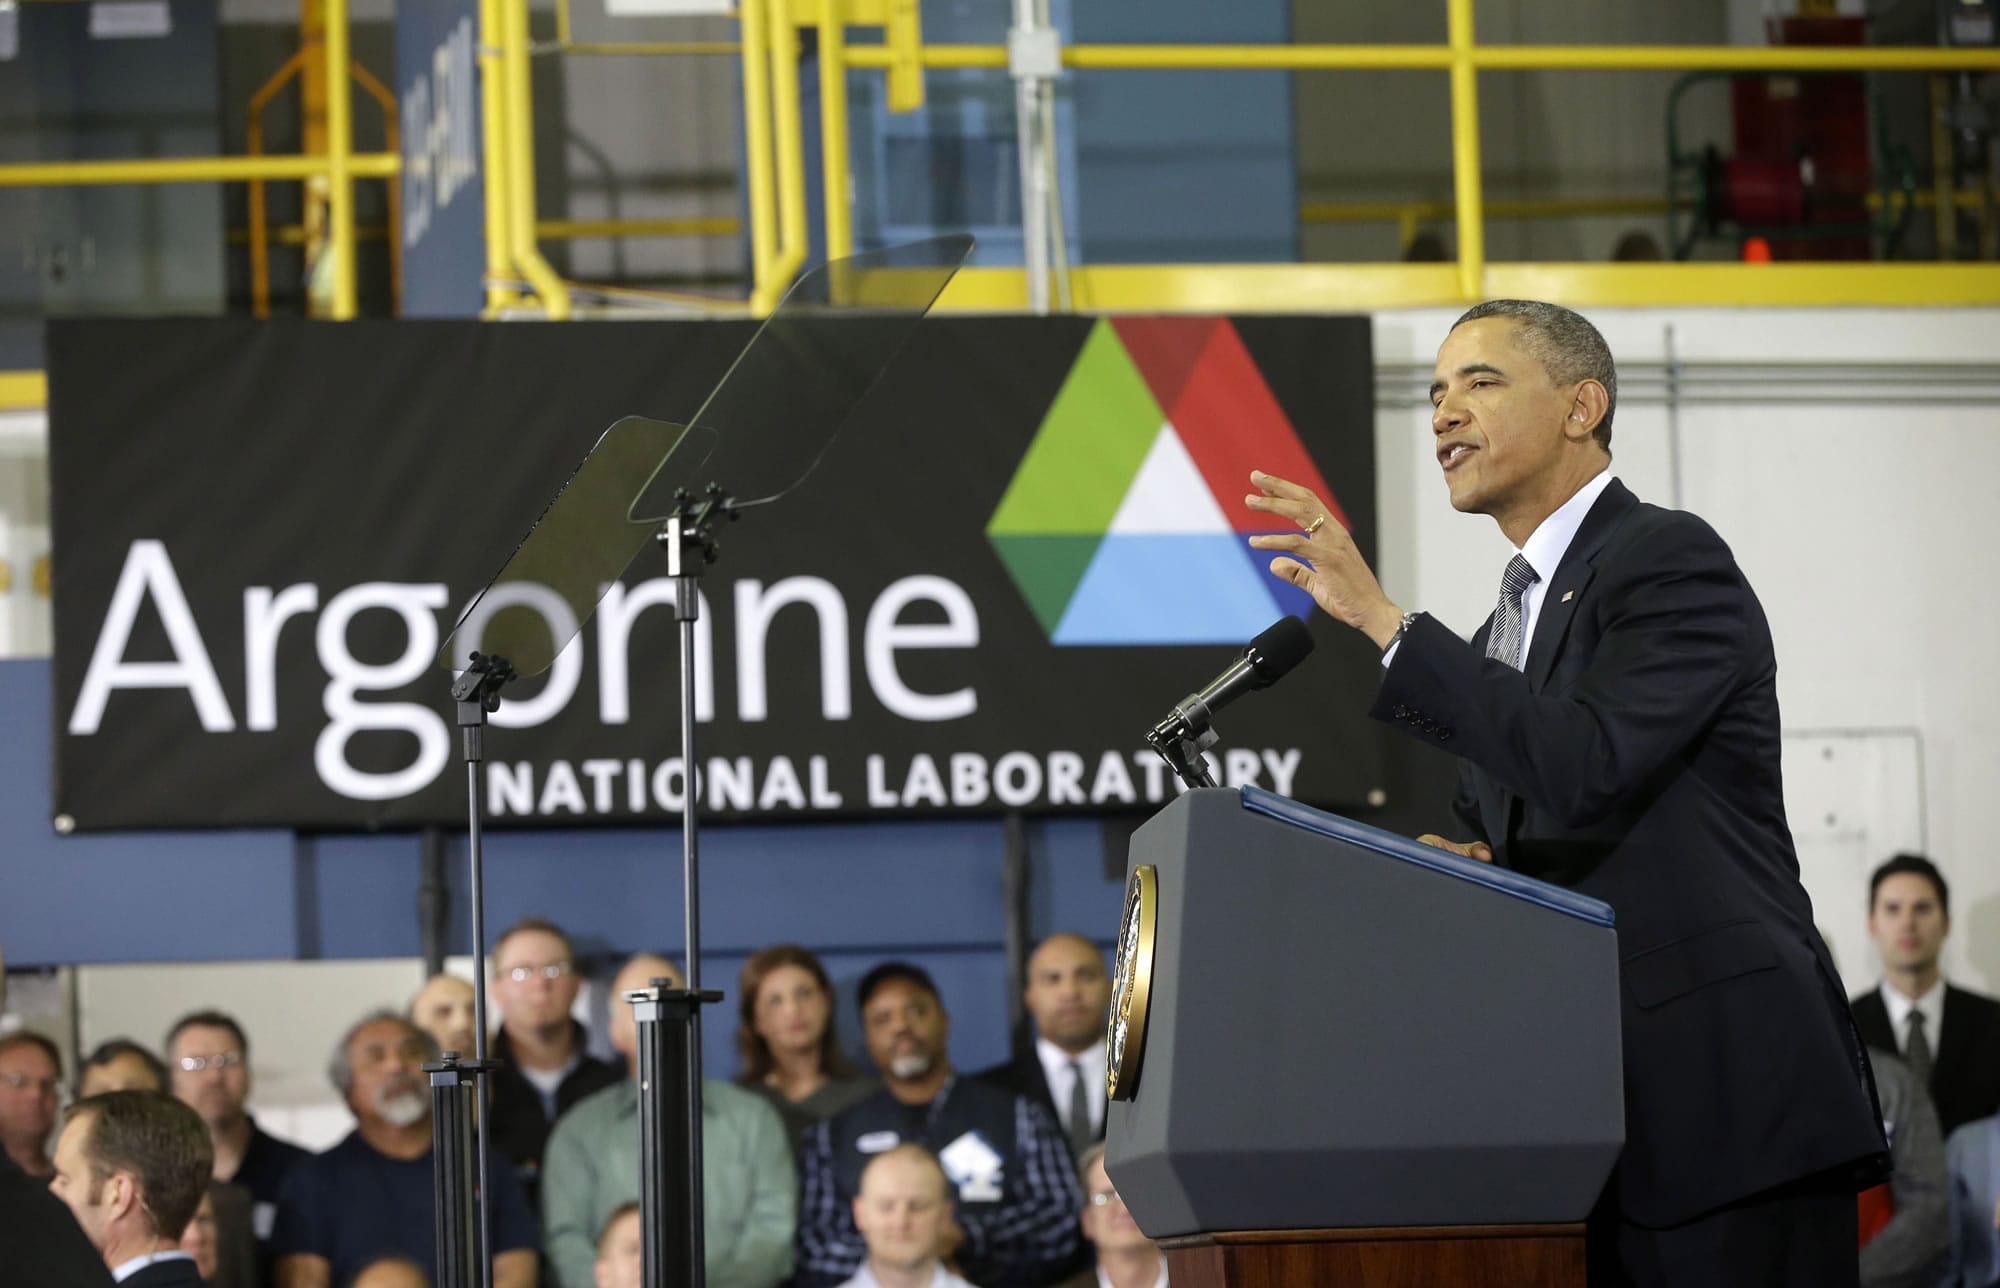 President Barack Obama speaks Friday at Argonne National Laboratory in Argonne, Ill.,  promote his energy policies.